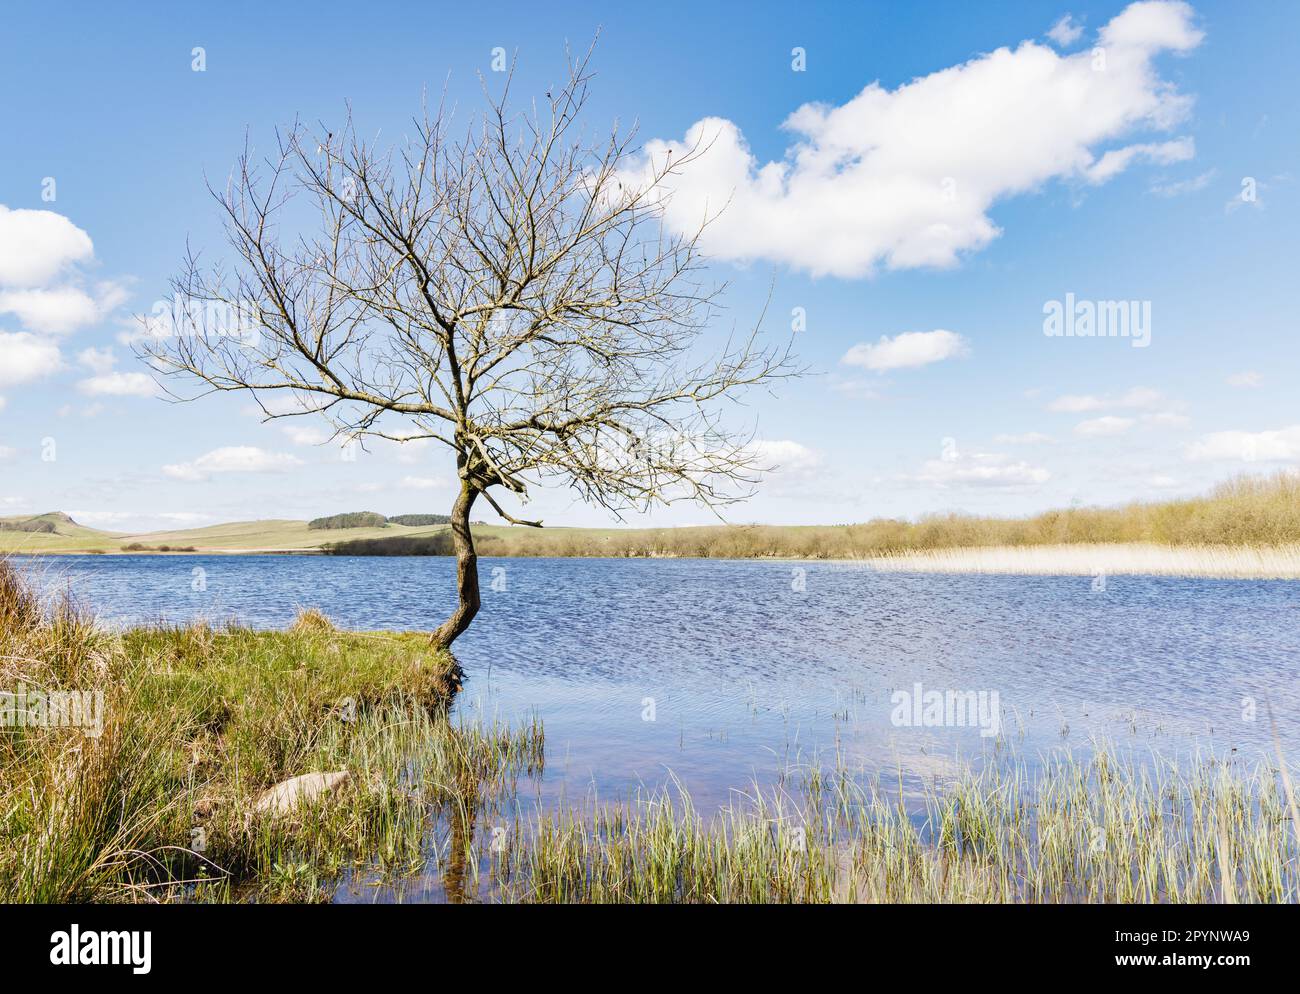 Northumberland, UK - April: A small tree with a twisted trunk grows at the waters' edge of Crag Lough, a lake to the north of Hadrian's Wall. Stock Photo